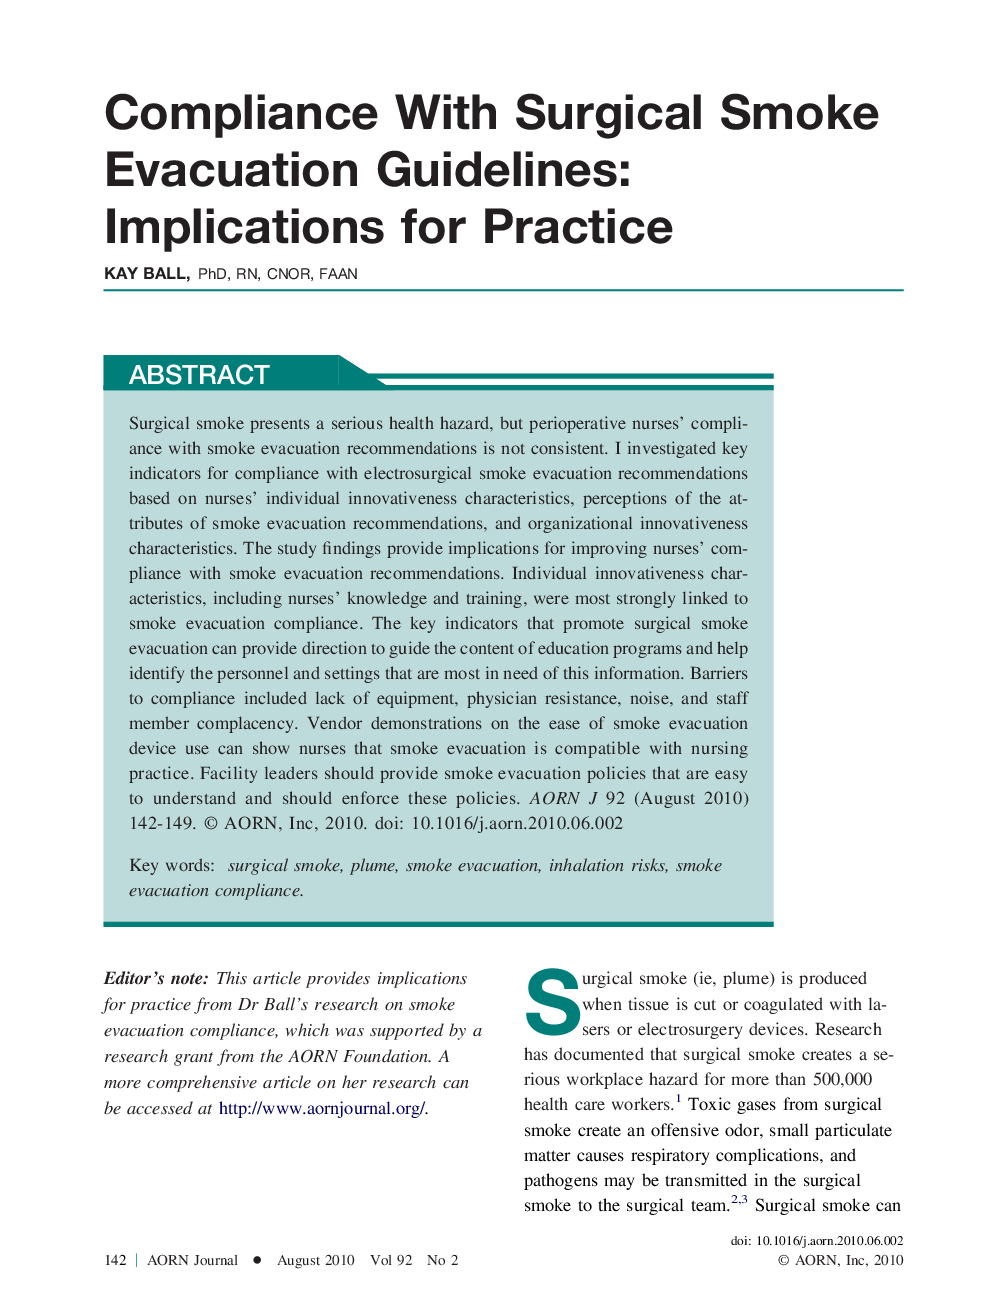 Compliance With Surgical Smoke Evacuation Guidelines: Implications for Practice